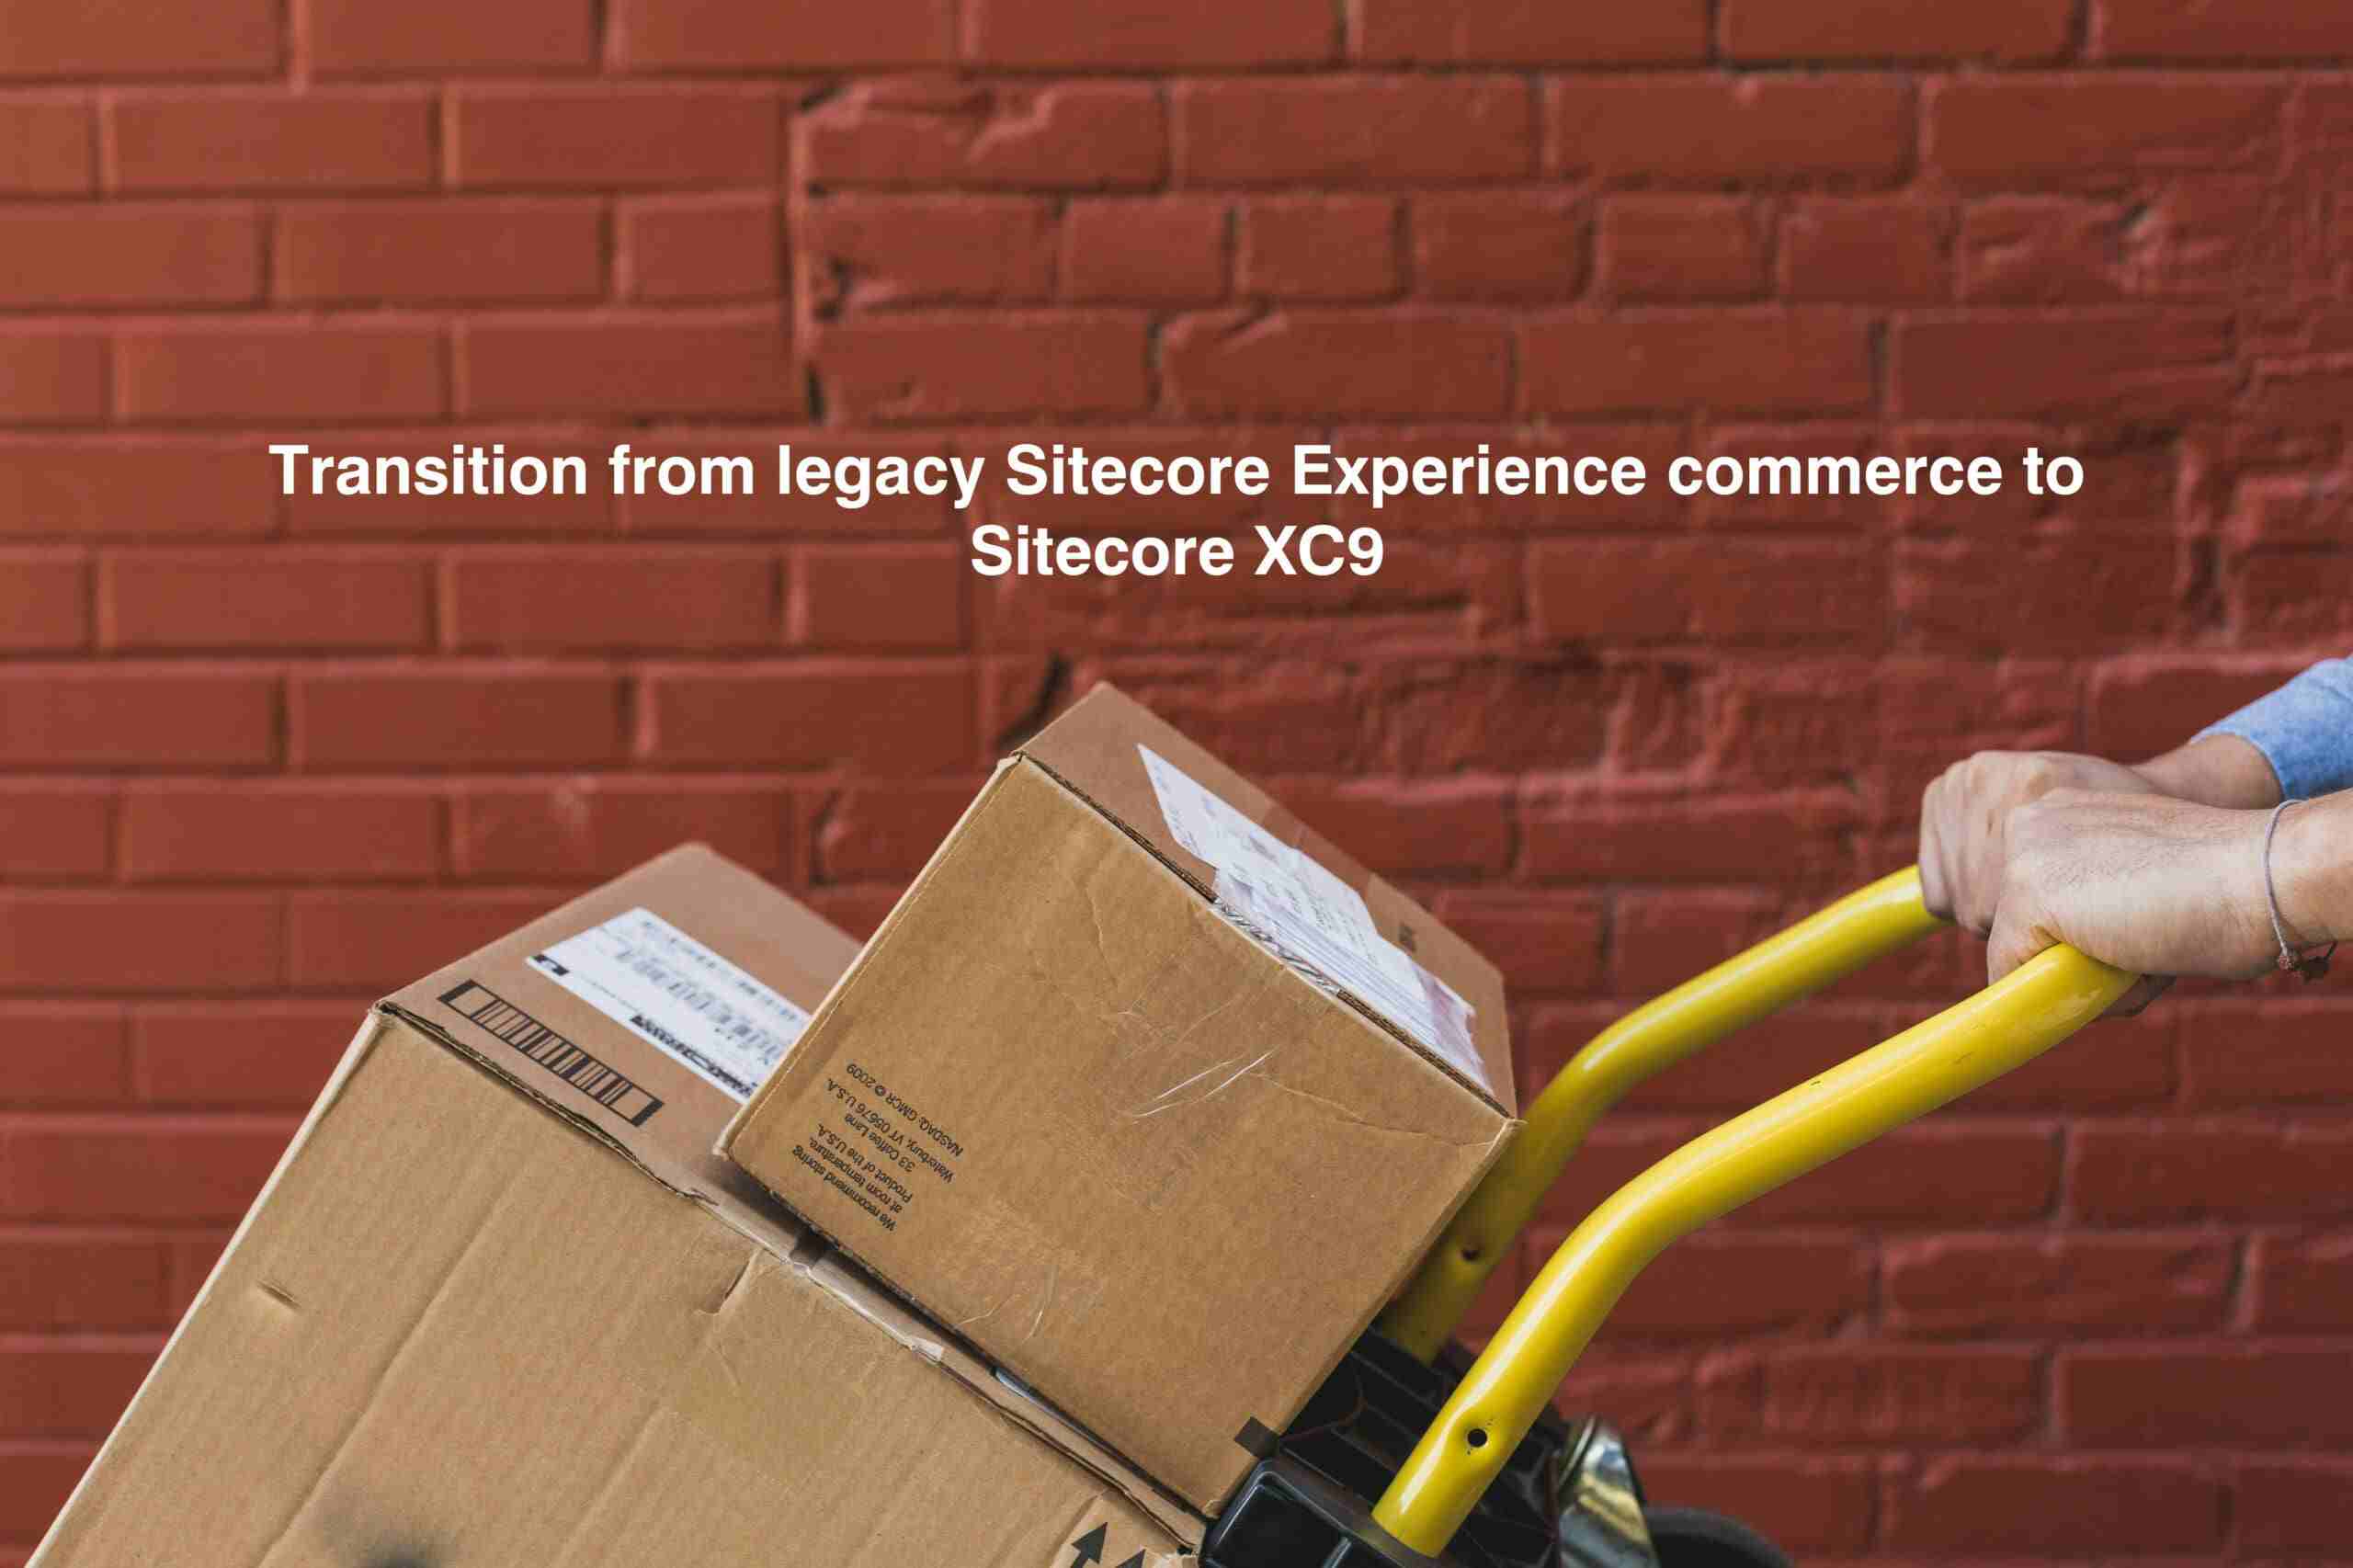 transition-from-legacy-sitecore-experience-commerce-to-sitecore-xc9-and-employ-extreme-flexibility-and-scalability-1